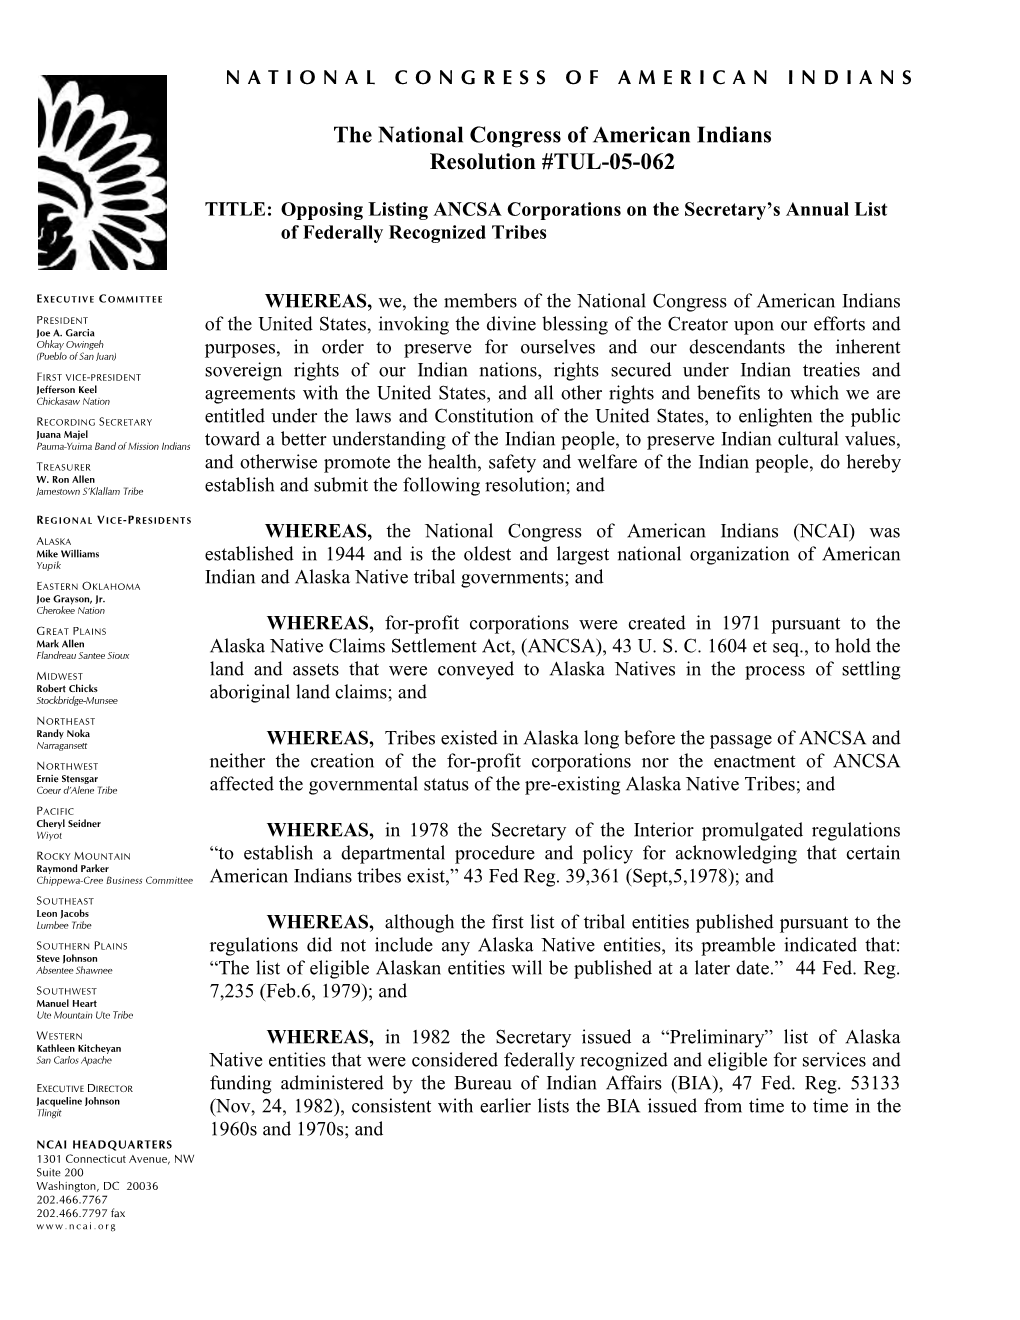 The National Congress of American Indians Resolution #TUL-05-062